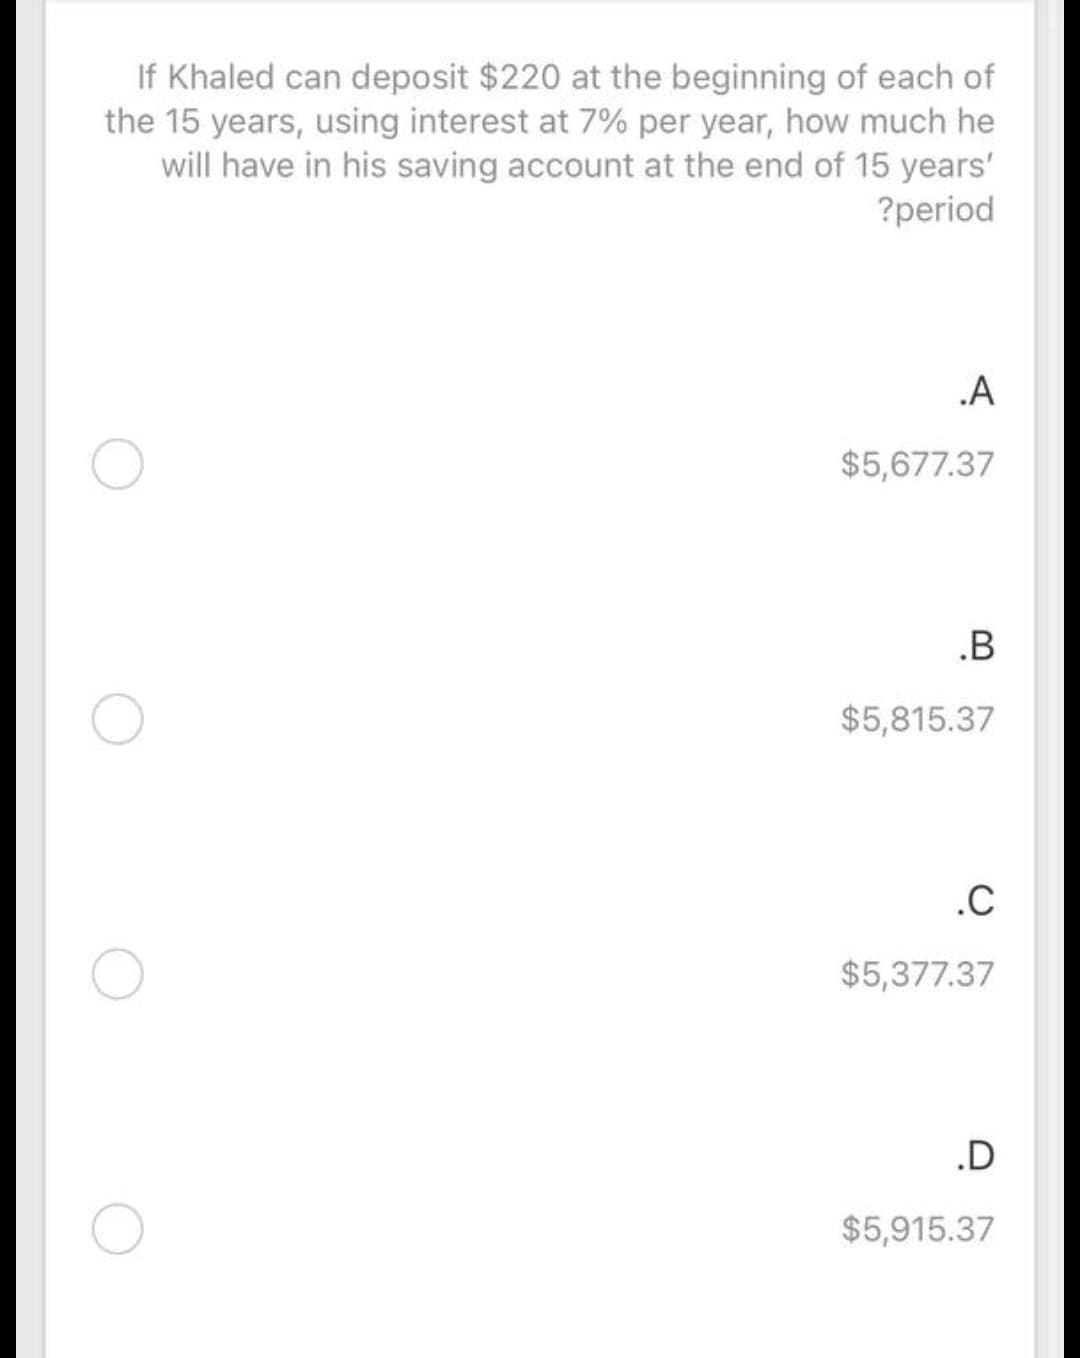 If Khaled can deposit $220 at the beginning of each of
the 15 years, using interest at 7% per year, how much he
will have in his saving account at the end of 15 years'
?period
.A
$5,677.37
.B
$5,815.37
.C
$5,377.37
.D
$5,915.37
